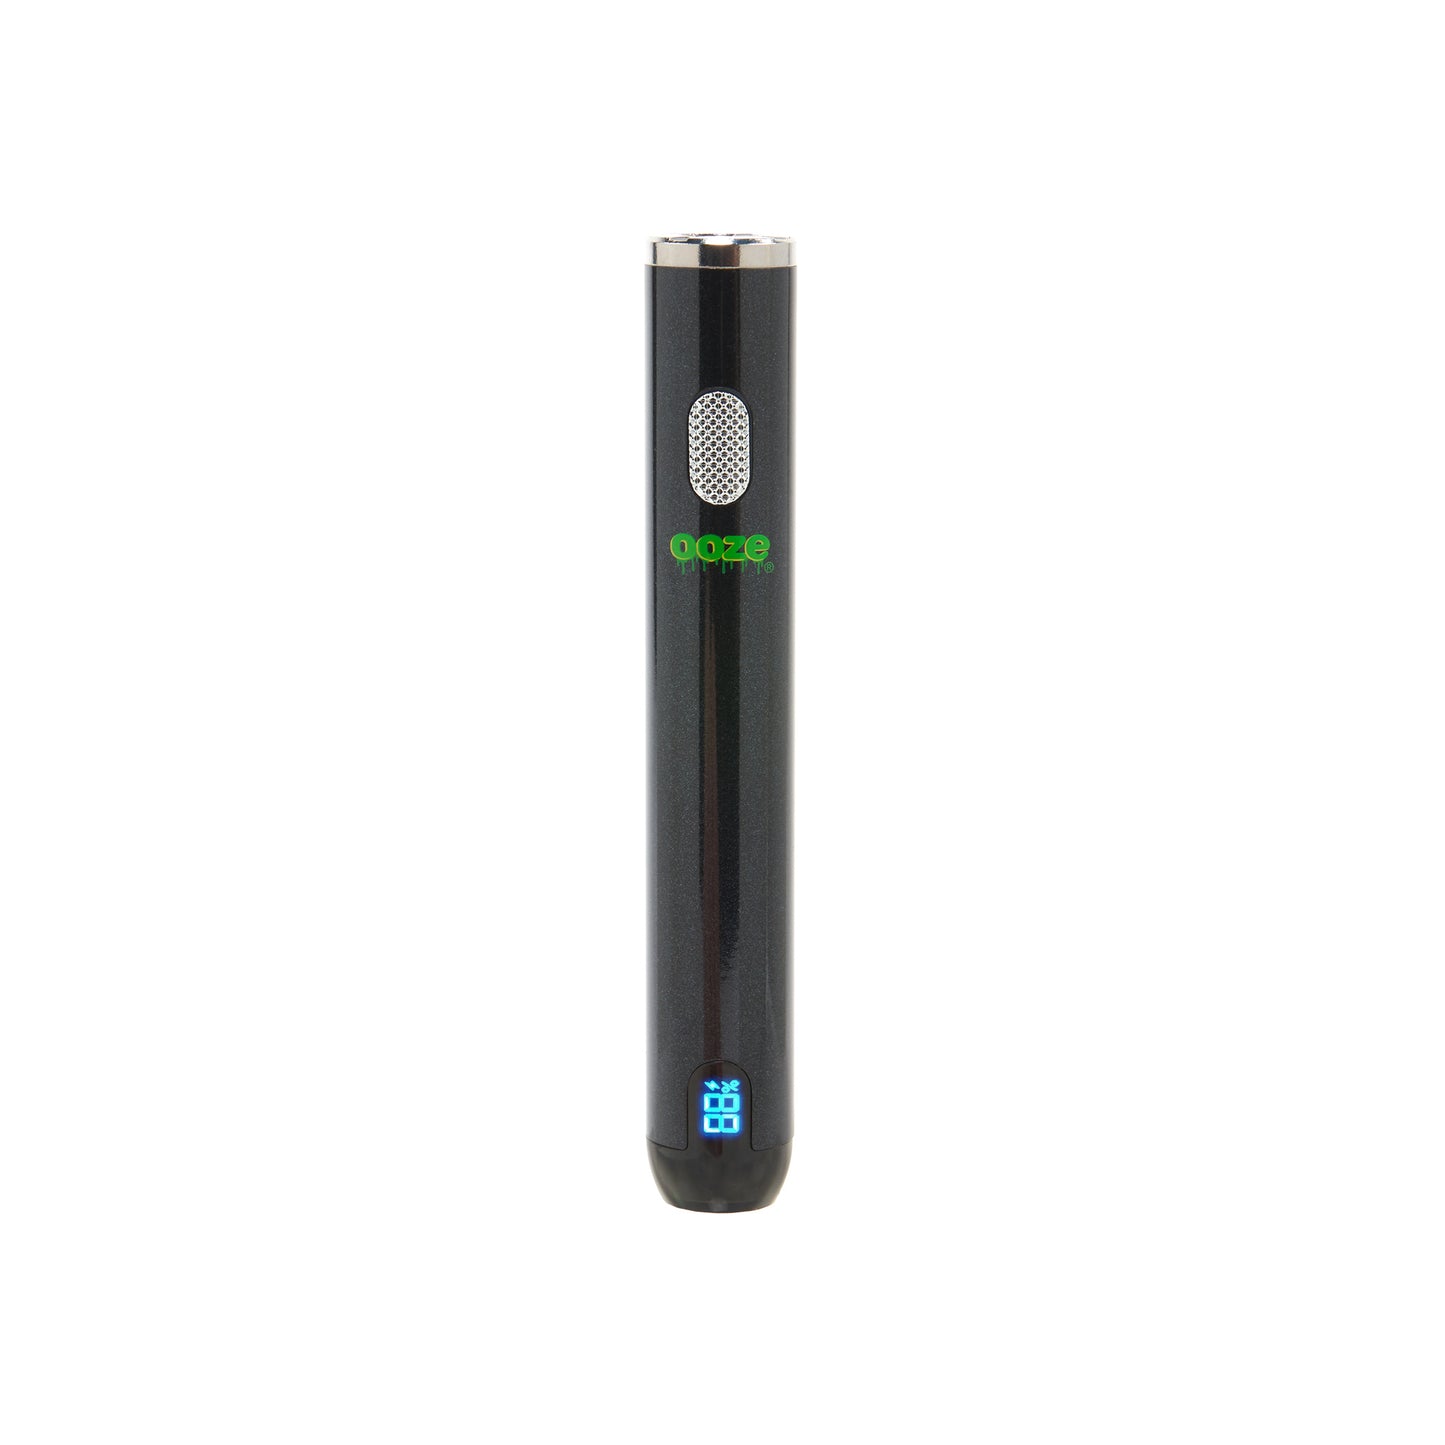 The black Ooze Smart Battery is upright and turned on without the charger